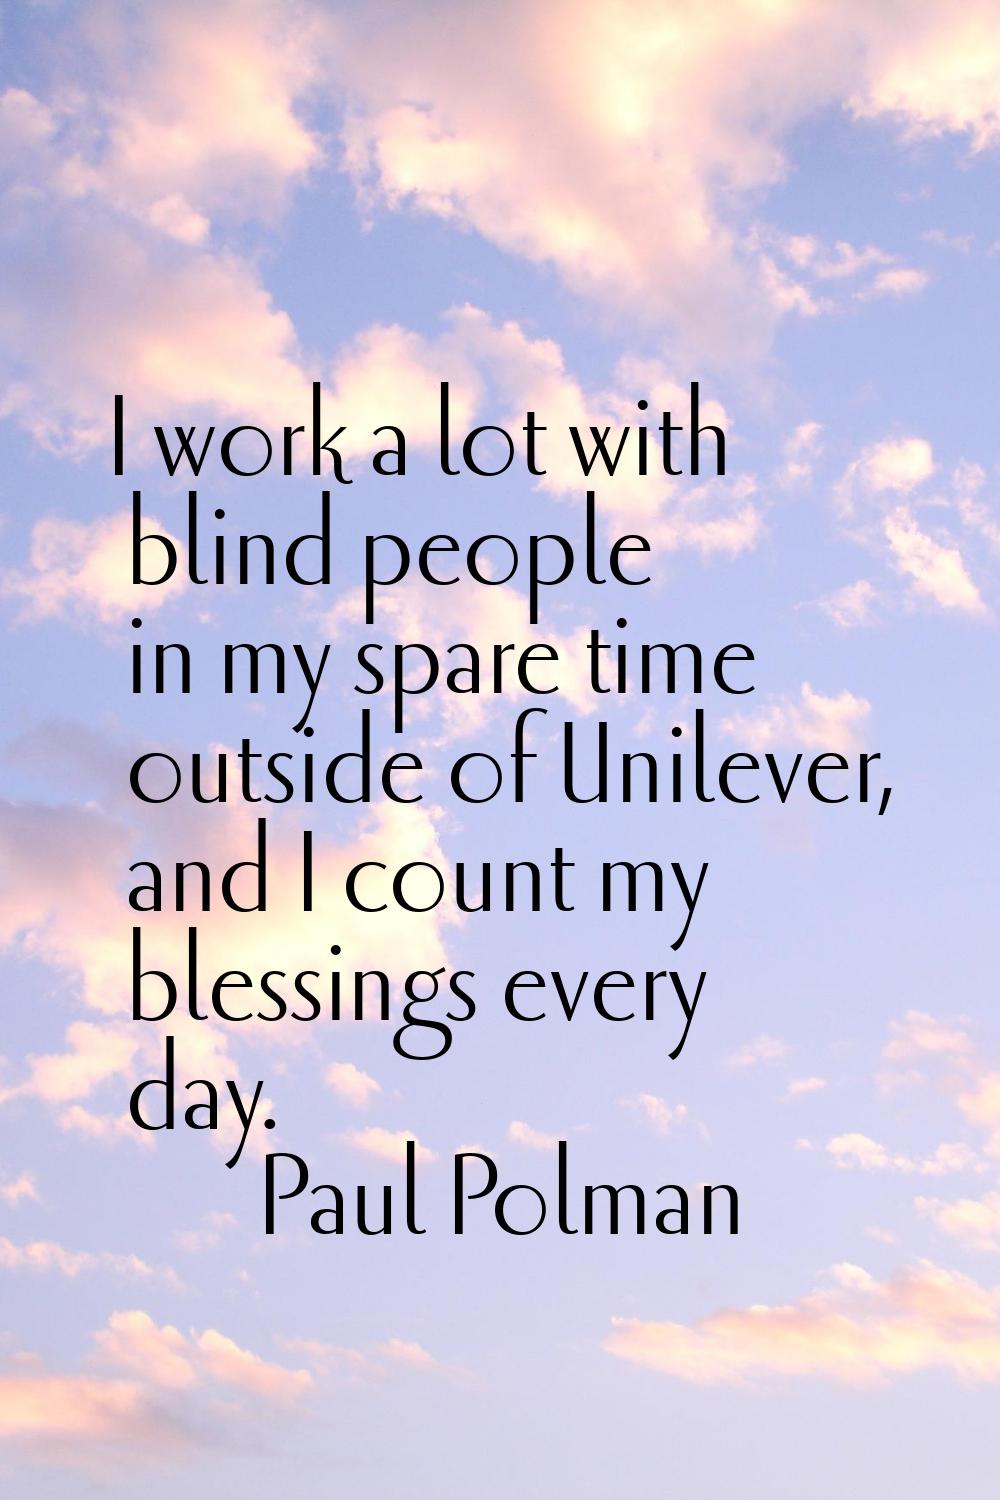 I work a lot with blind people in my spare time outside of Unilever, and I count my blessings every